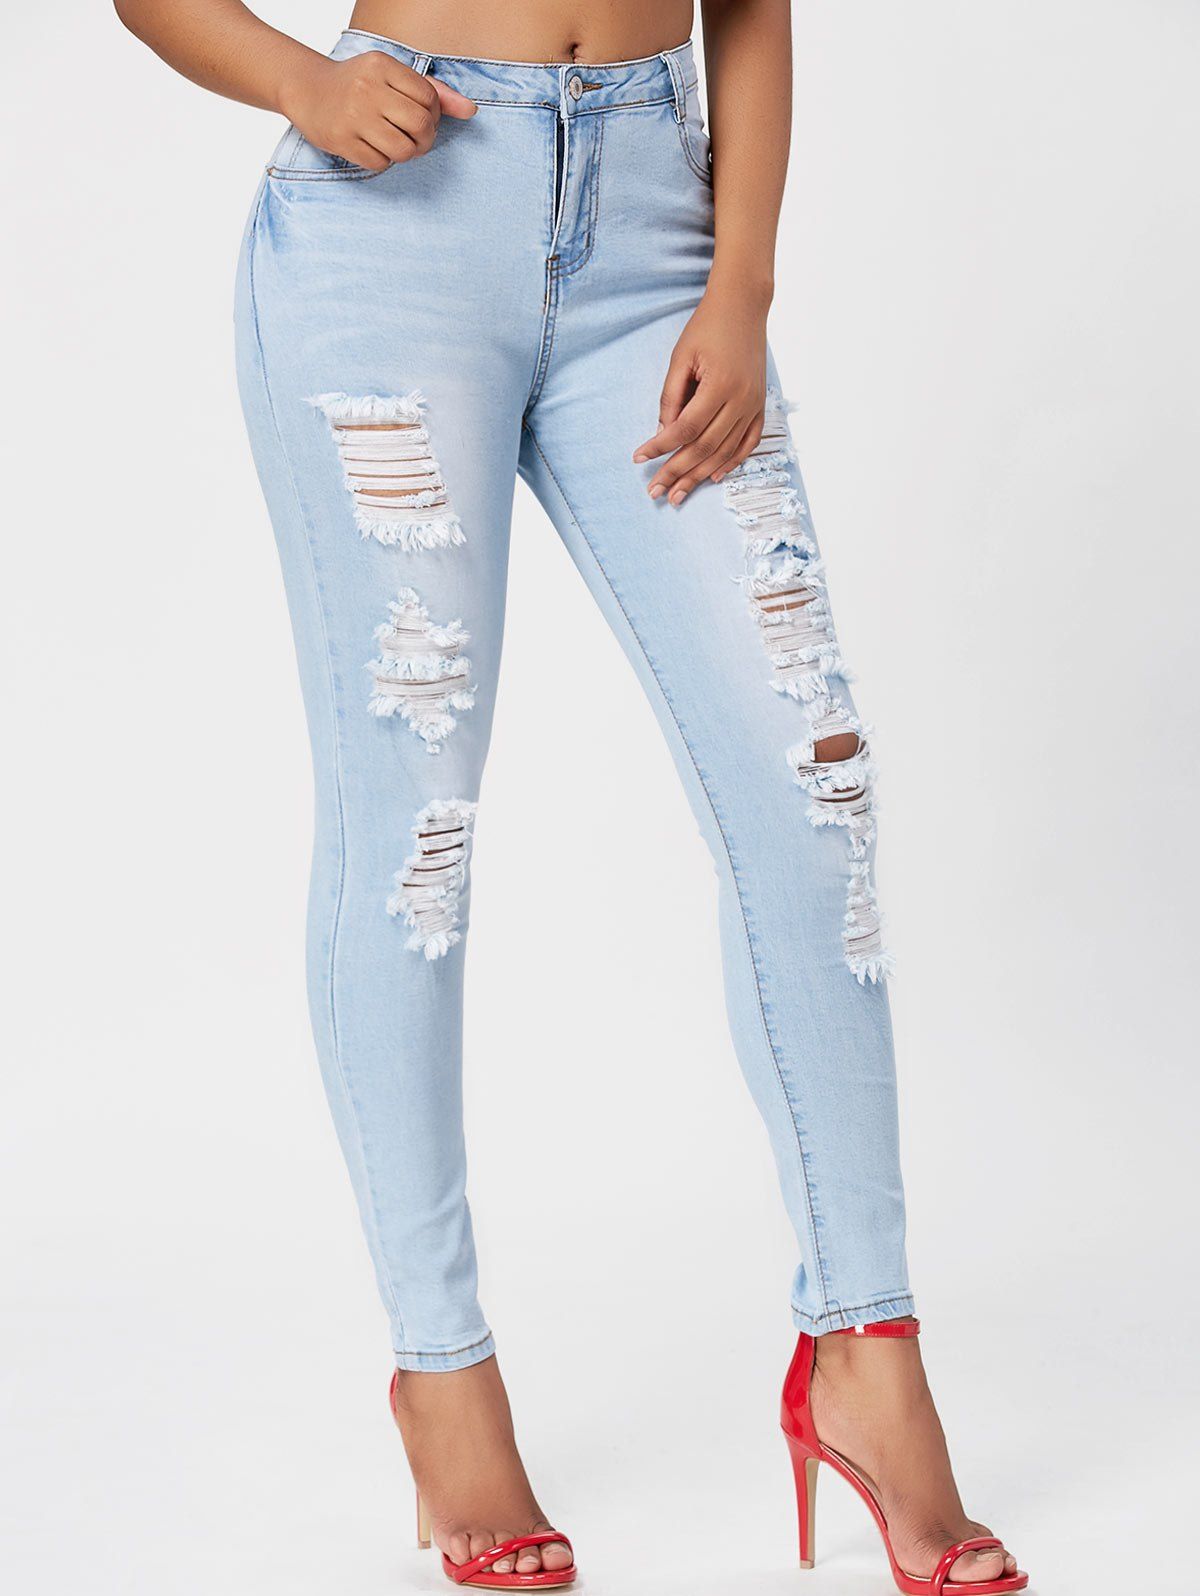 light wash ripped skinny jeans